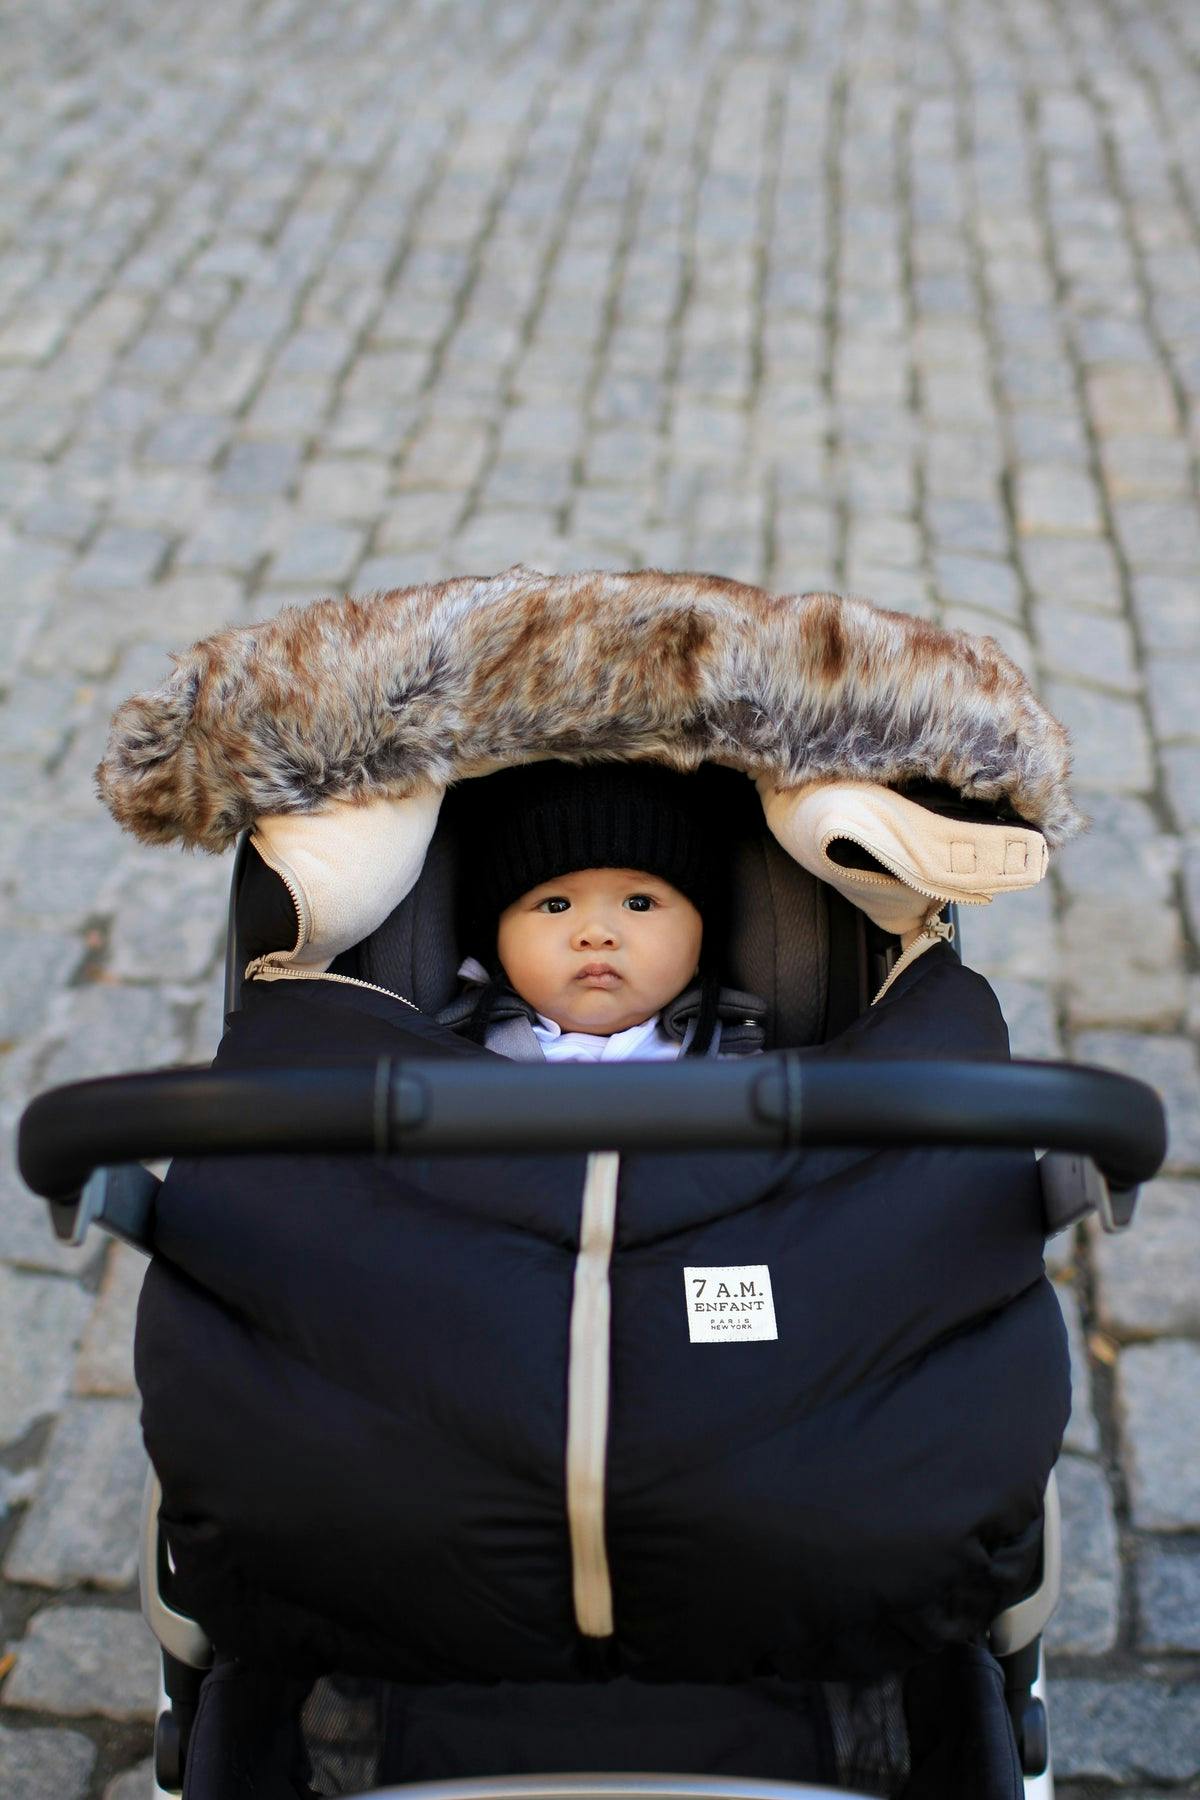 7 AM Enfant Car Seat Cocoon Tundra Collection · Black With Faux Fur